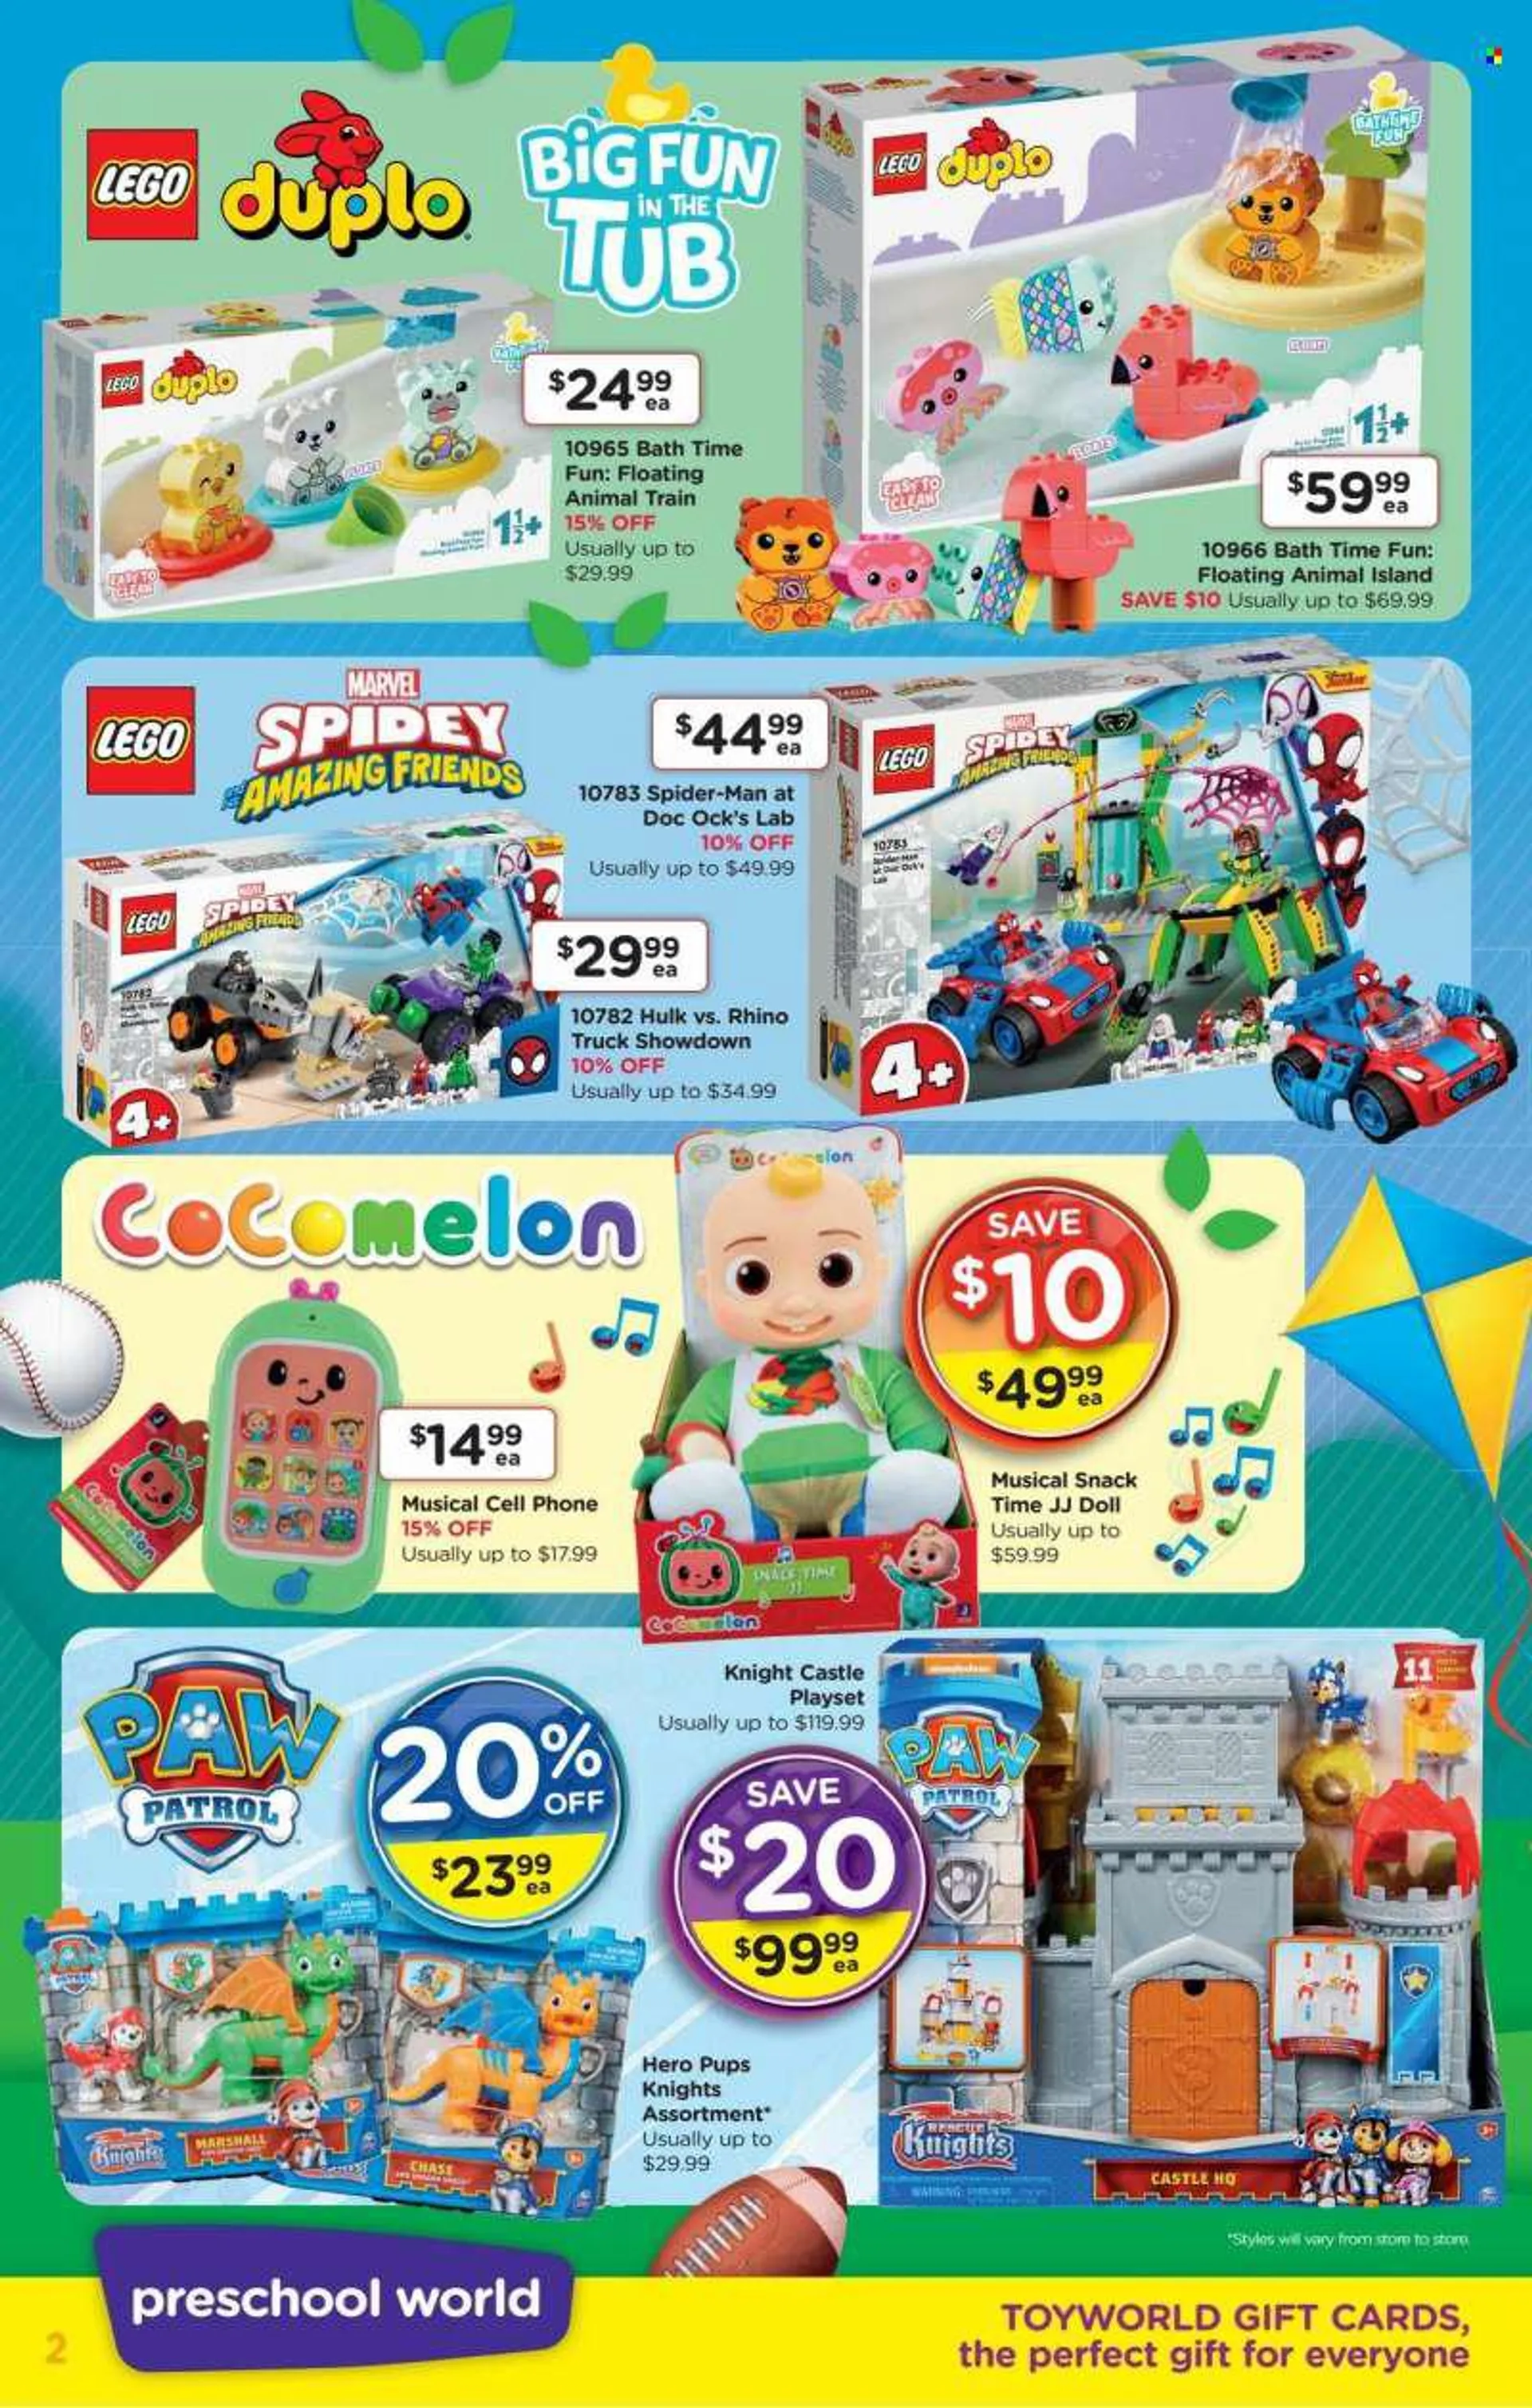 Toyworld mailer - 13.04.2022 - 01.05.2022. - 13 April 1 May 2022 - Page 2